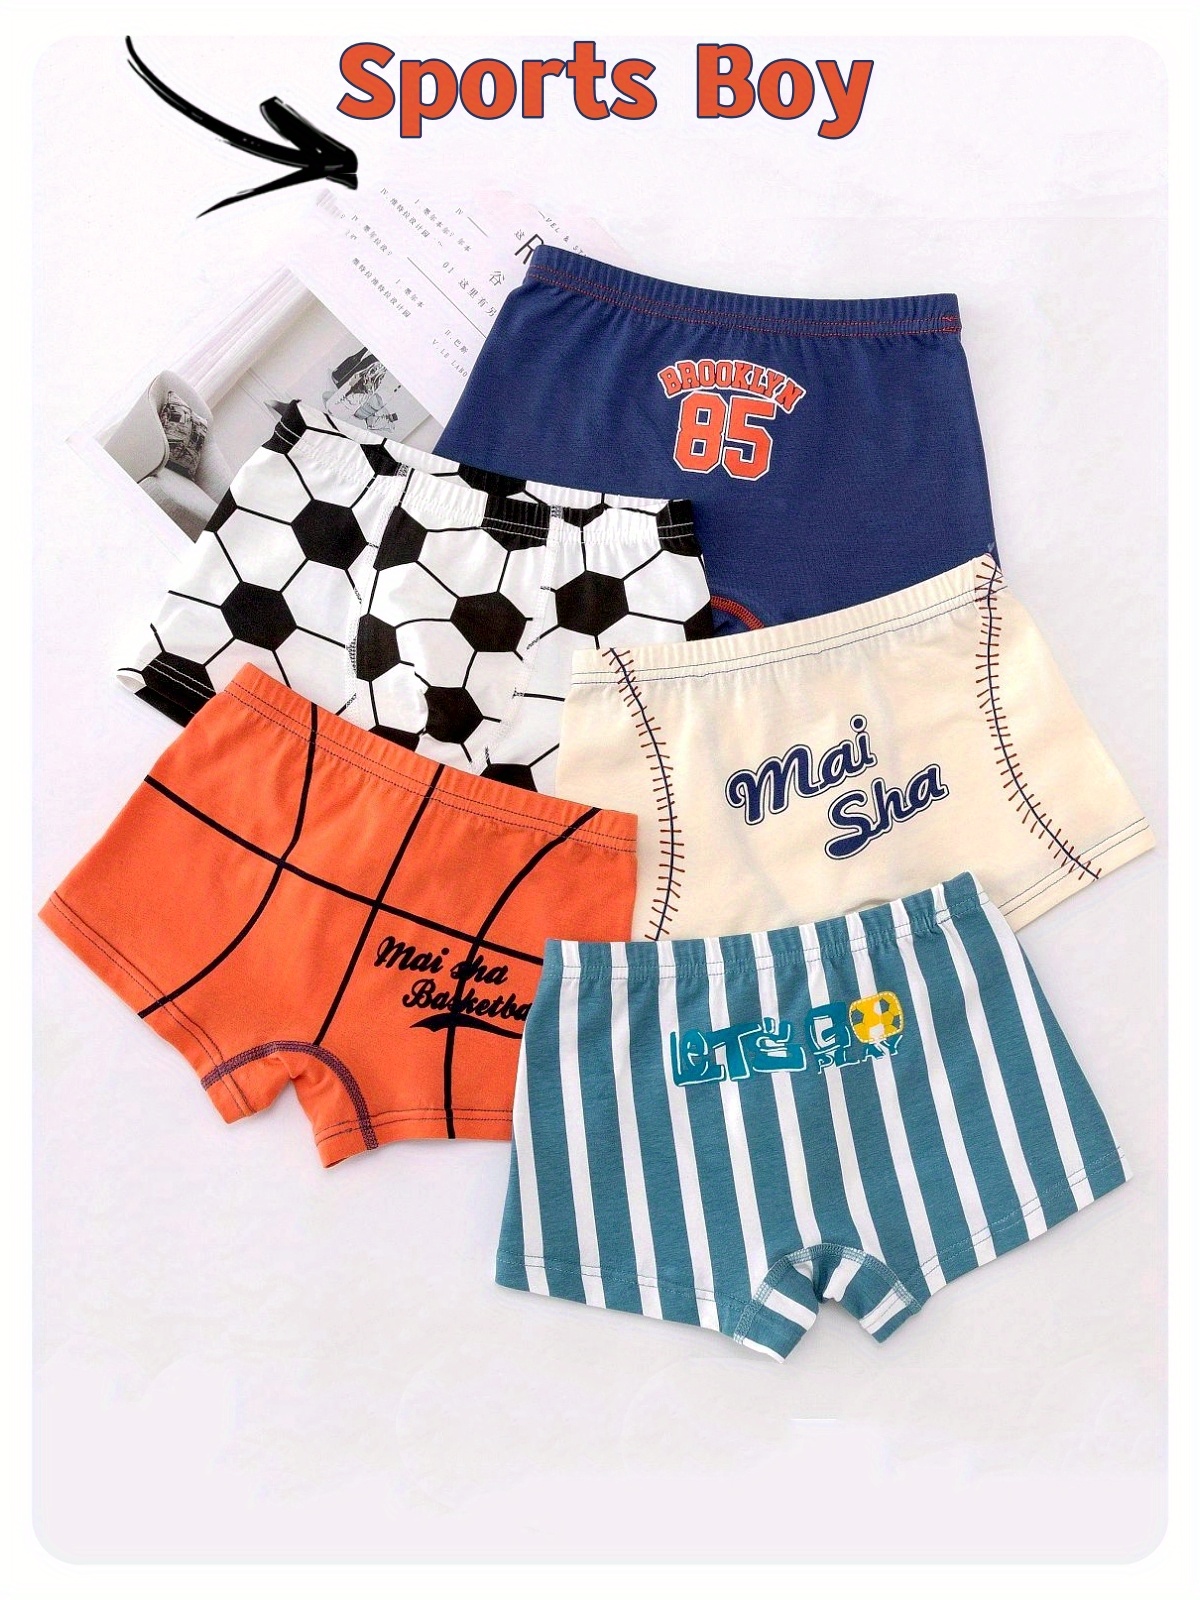 Baseball Print Novelty Boxer Underwear, Boy Size- Large and Small. MADE IN  USA